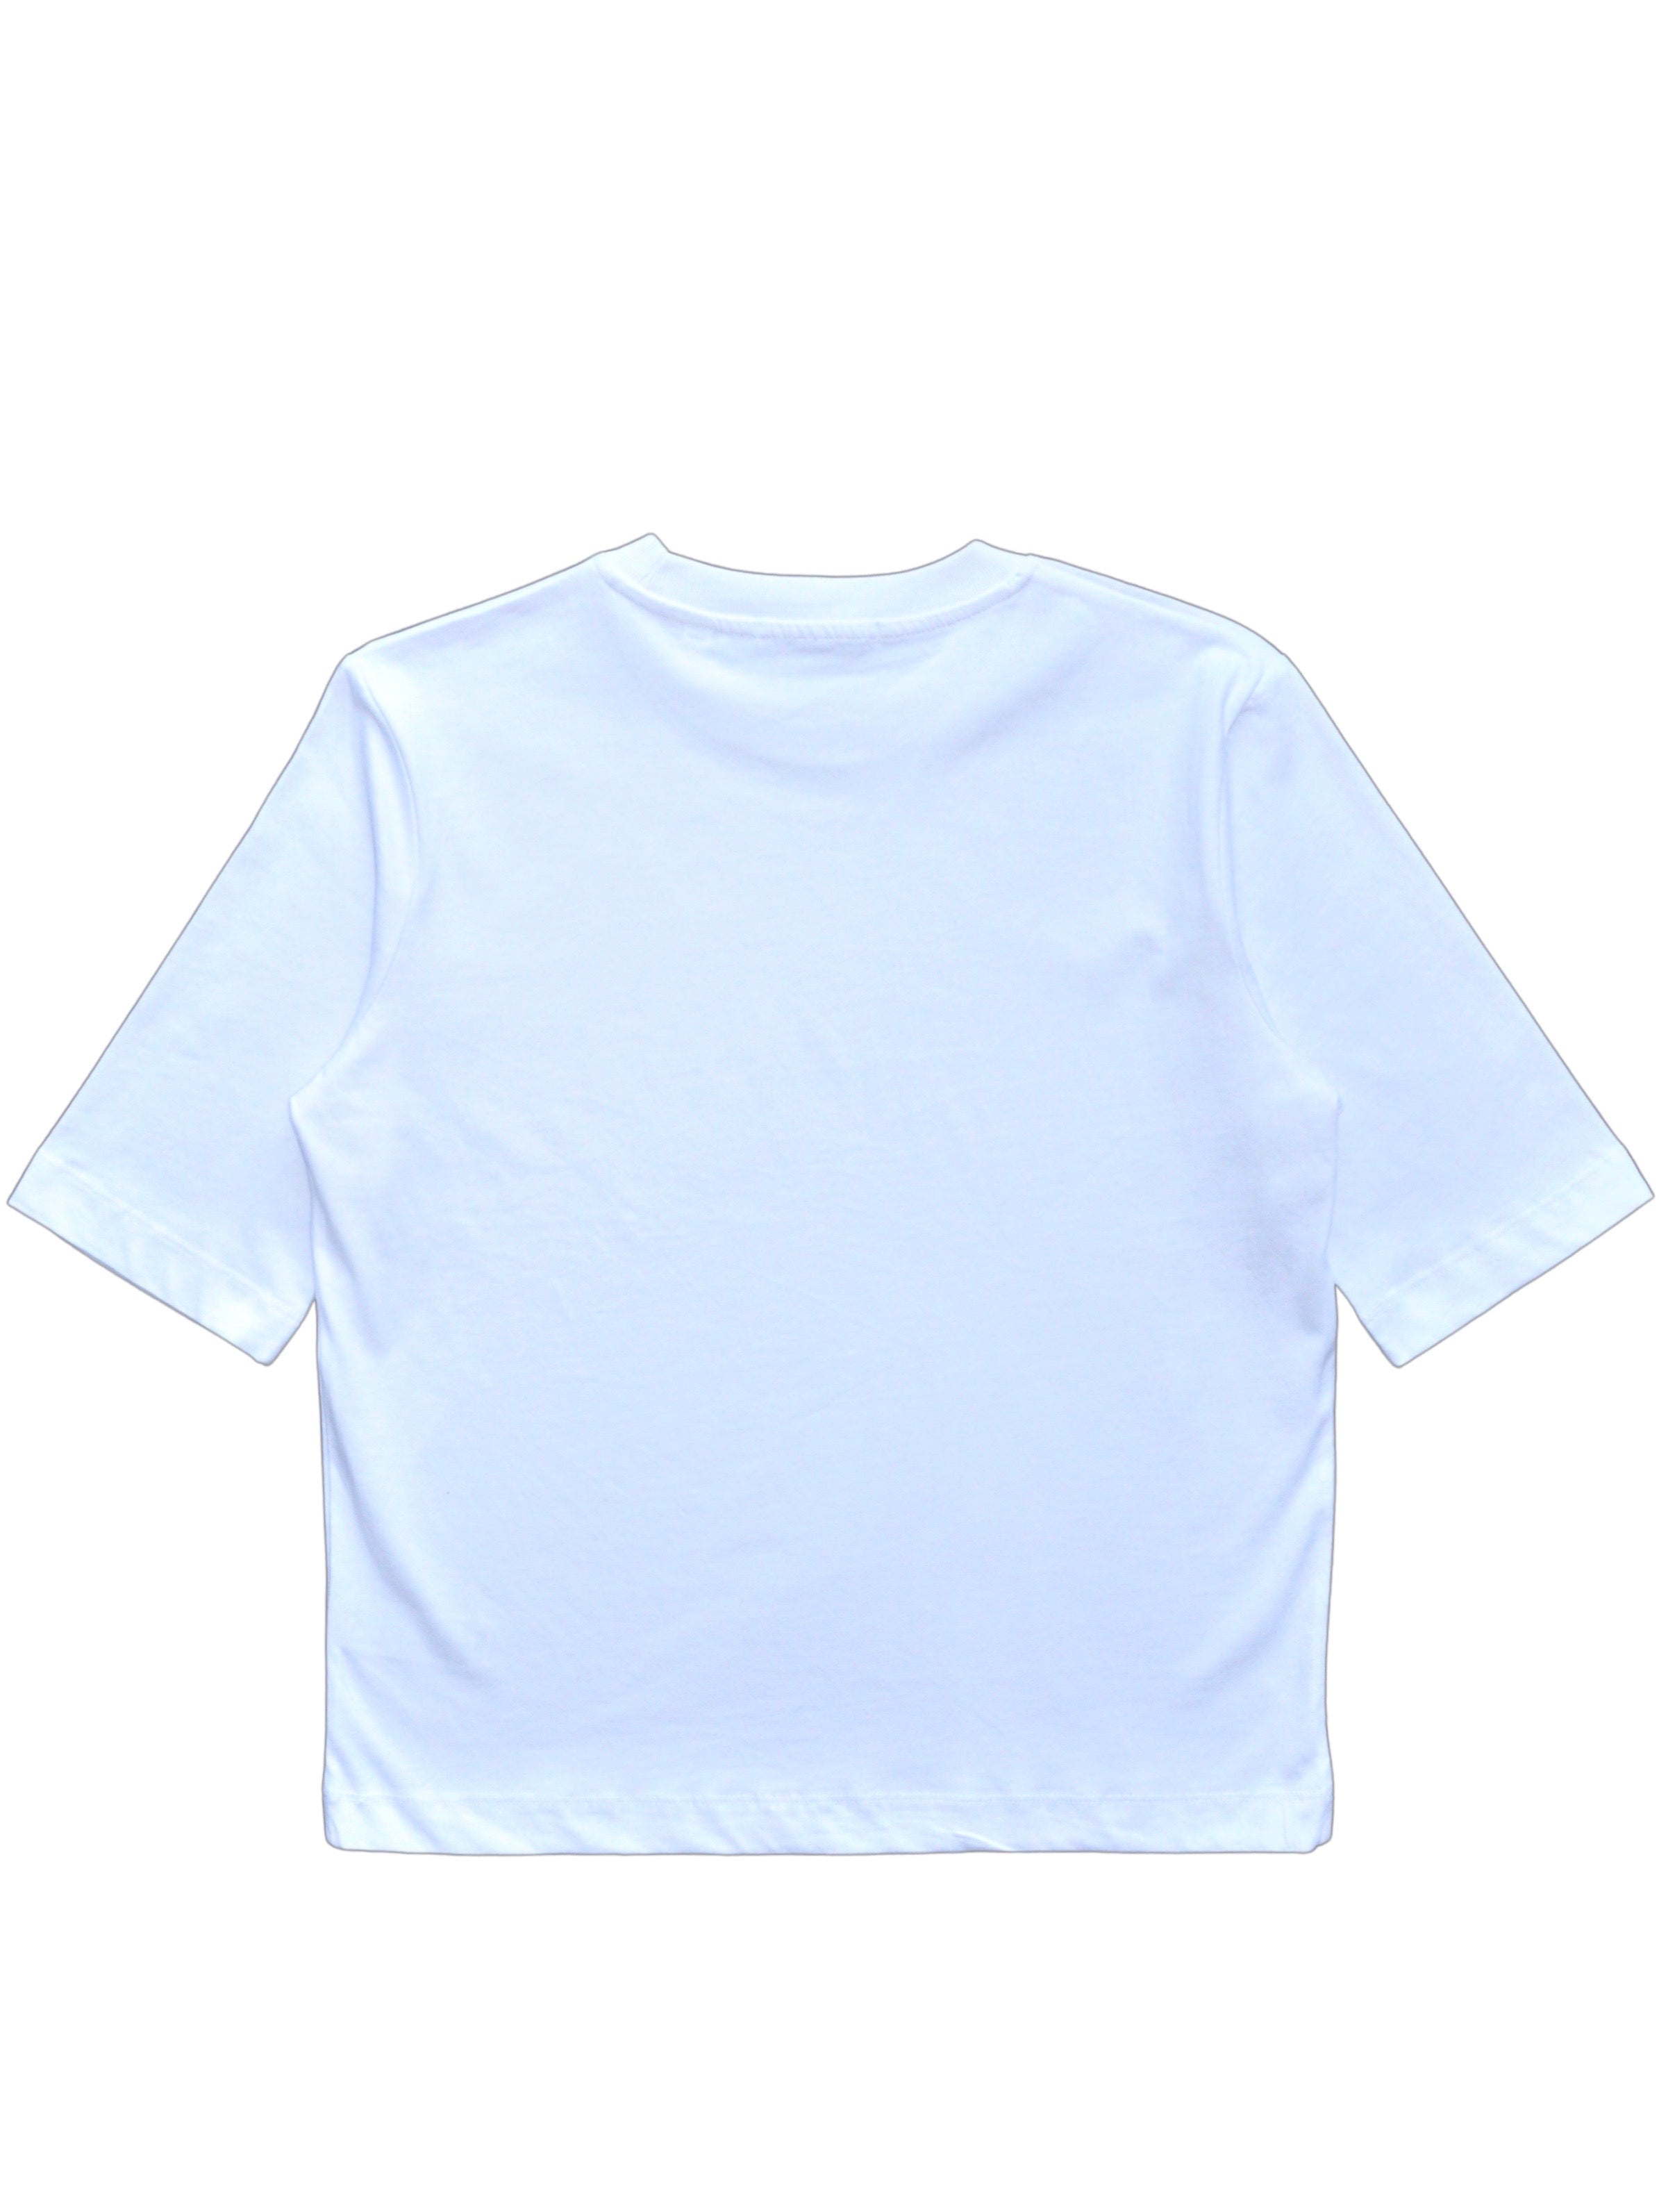 BY11 x Intangible Objects Organic Cotton Easy Fit T-shirt - White